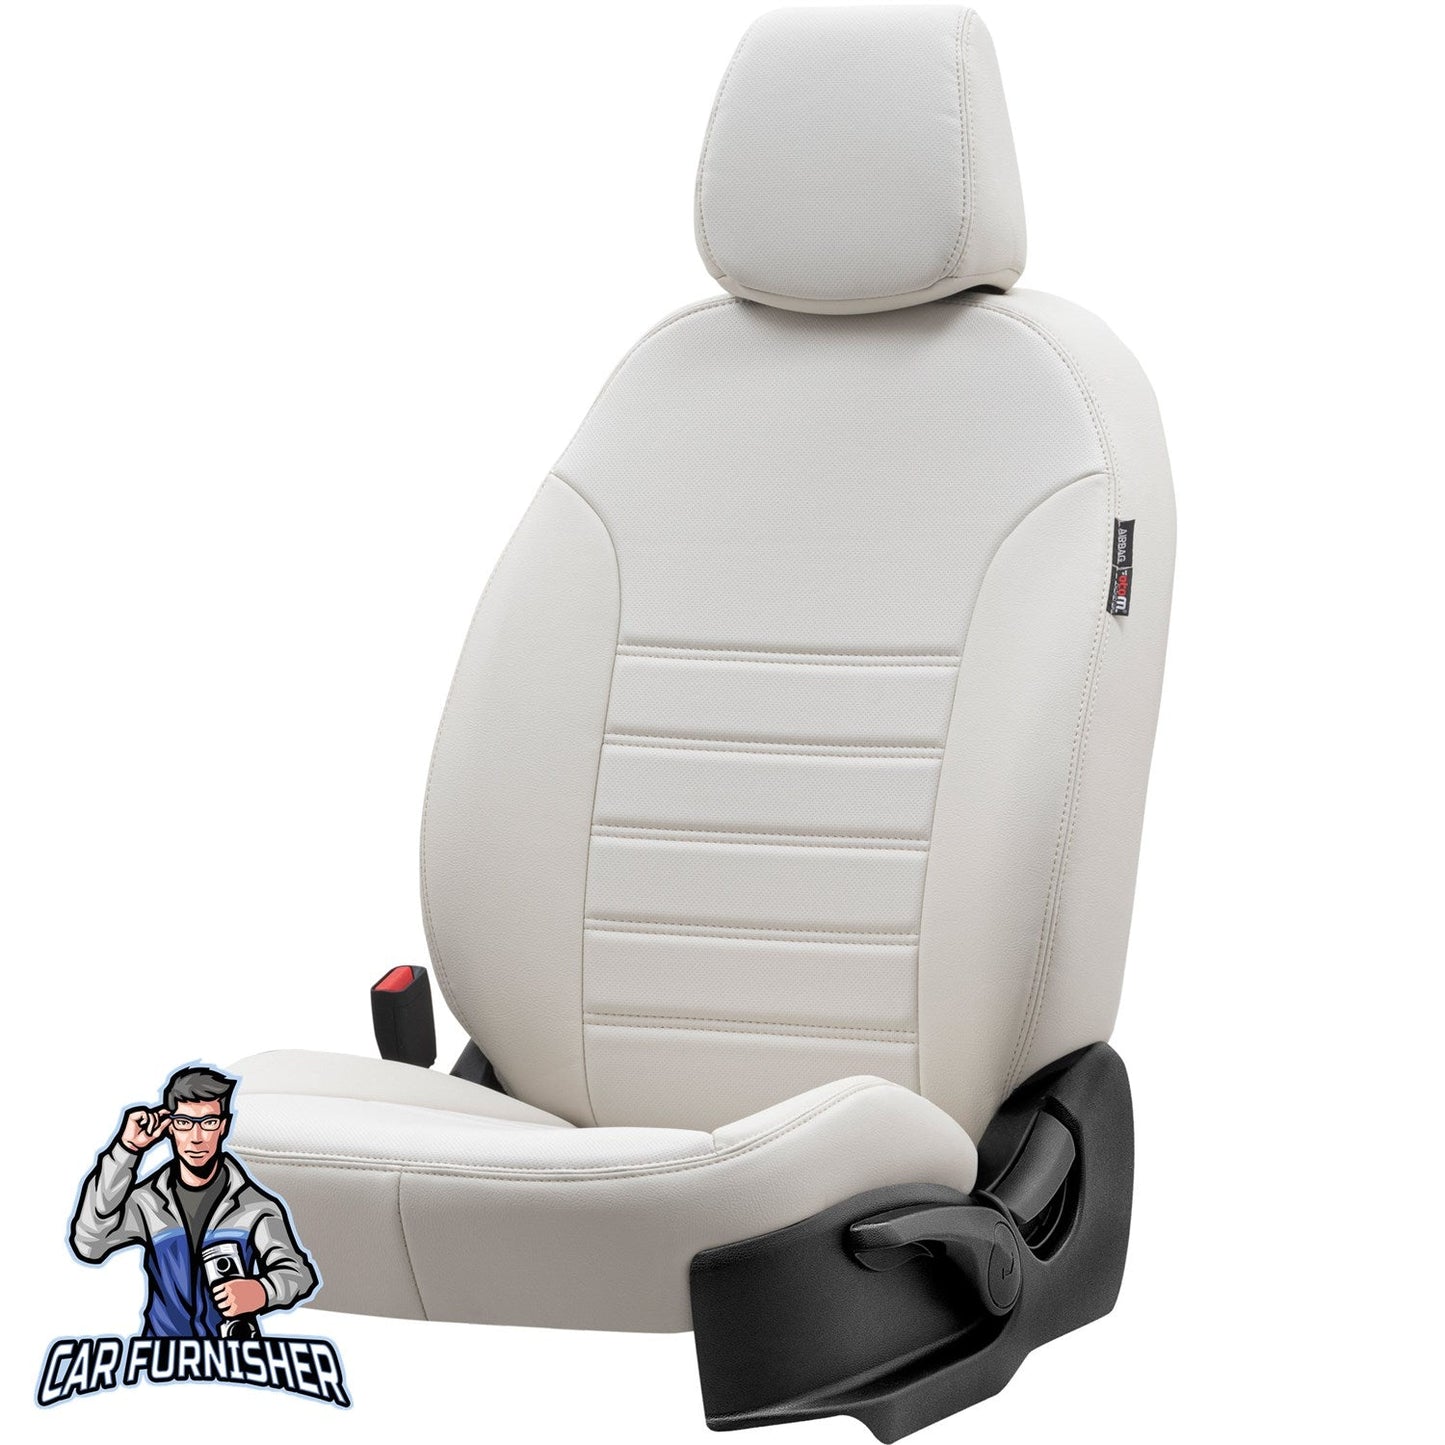 Tata Xenon Seat Covers Istanbul Leather Design Ivory Leather